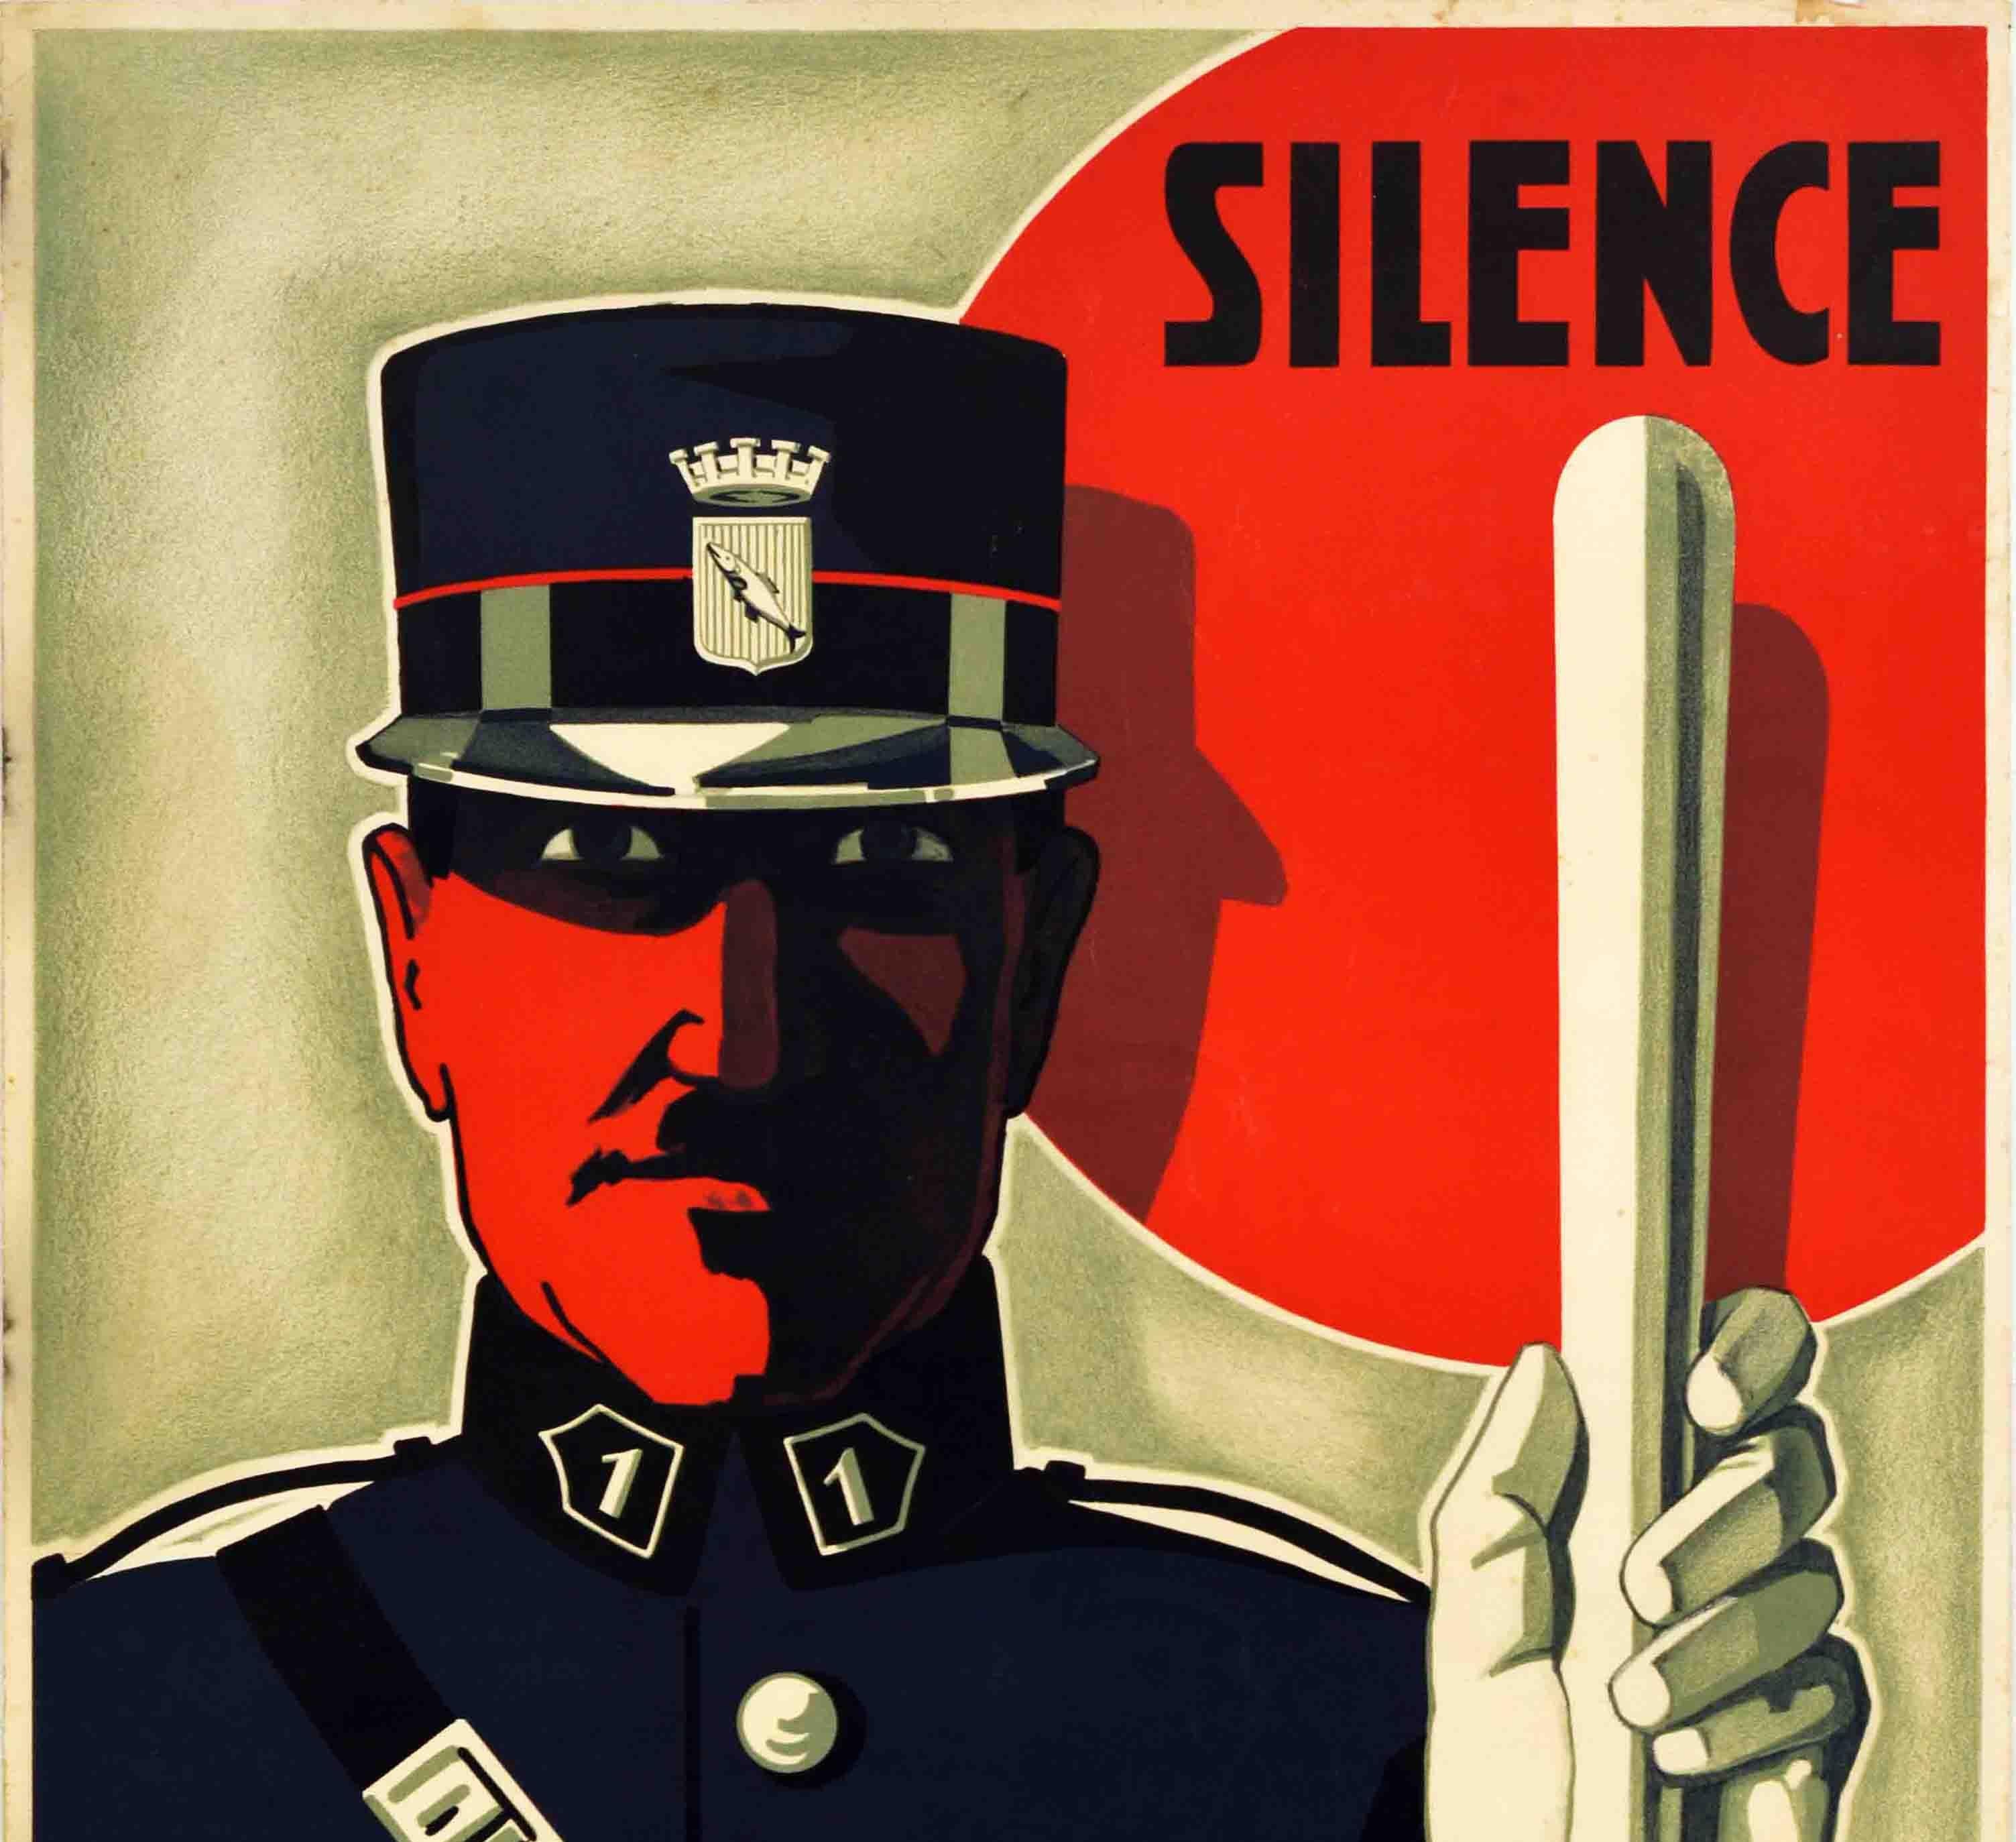 Original vintage health and safety poster featuring an Art Deco design depicting a policeman in uniform looking at the viewer and holding his baton up to the word Silence on a red background above, the rest of the text below - Silence Noise is